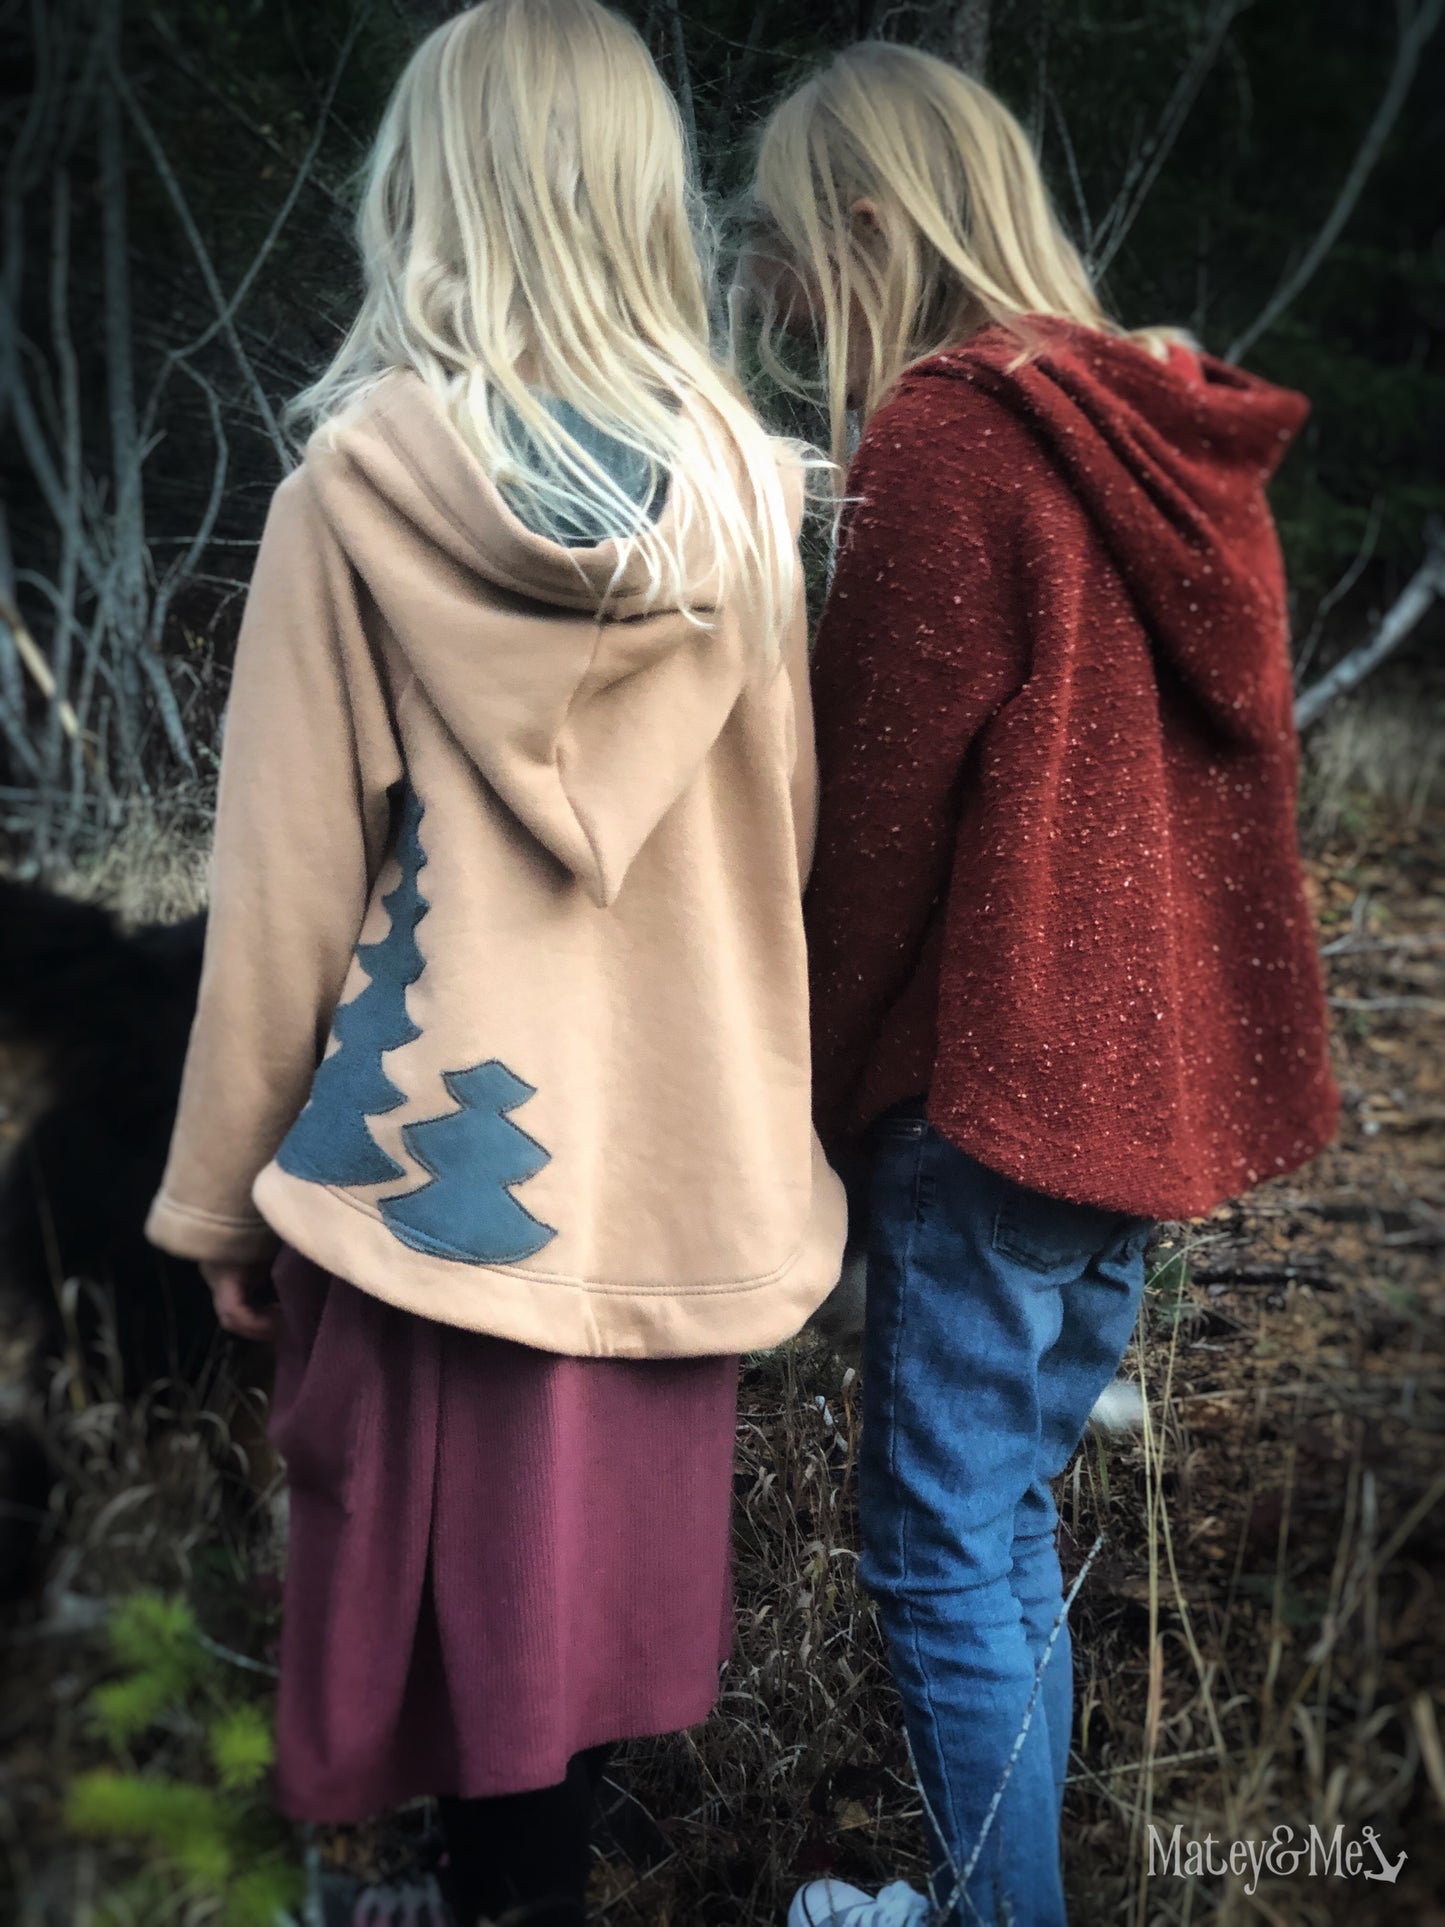 The Pixie Poncho Sewing Pattern